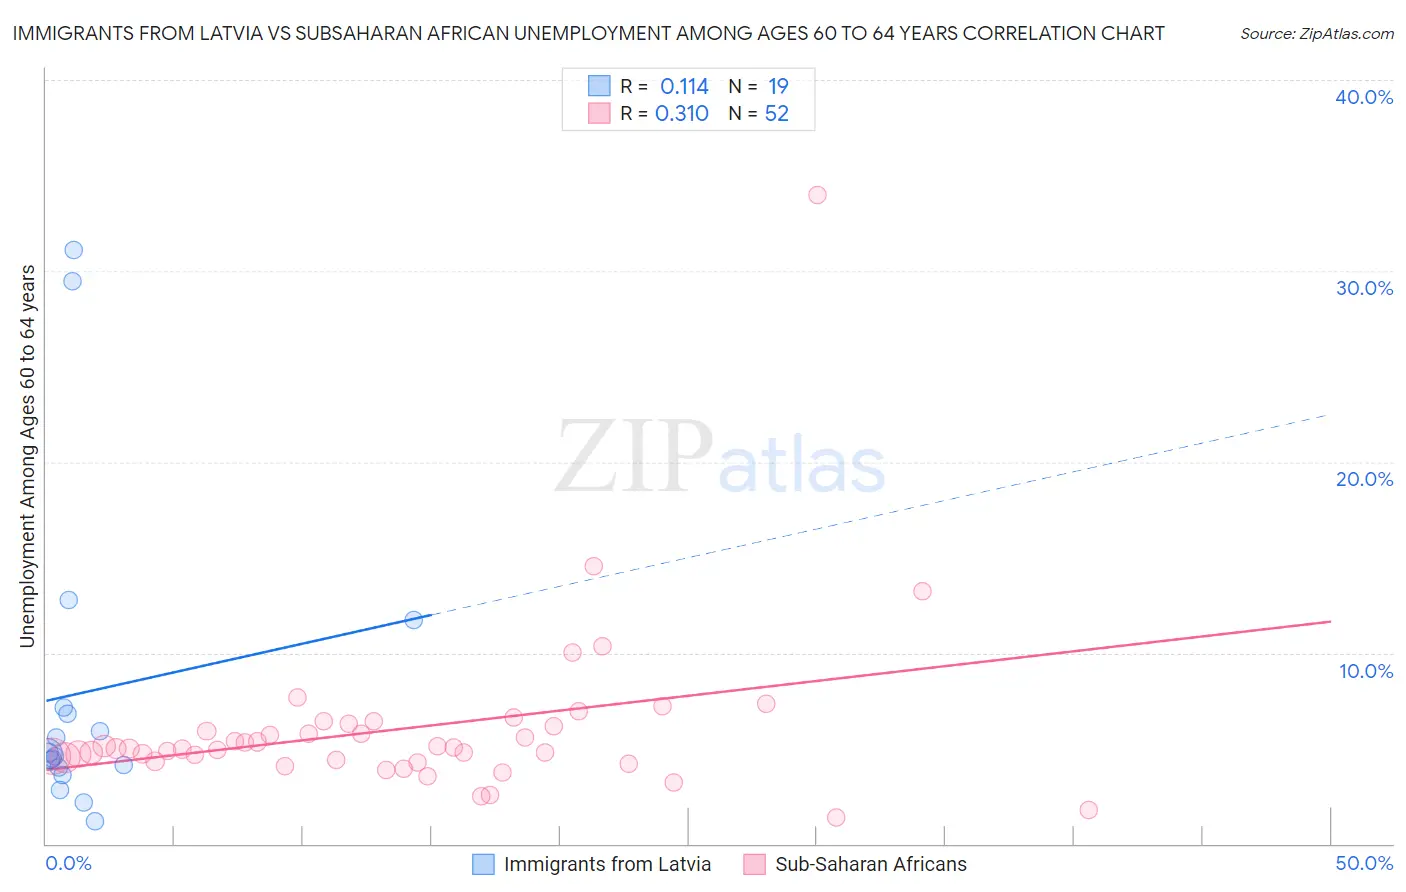 Immigrants from Latvia vs Subsaharan African Unemployment Among Ages 60 to 64 years